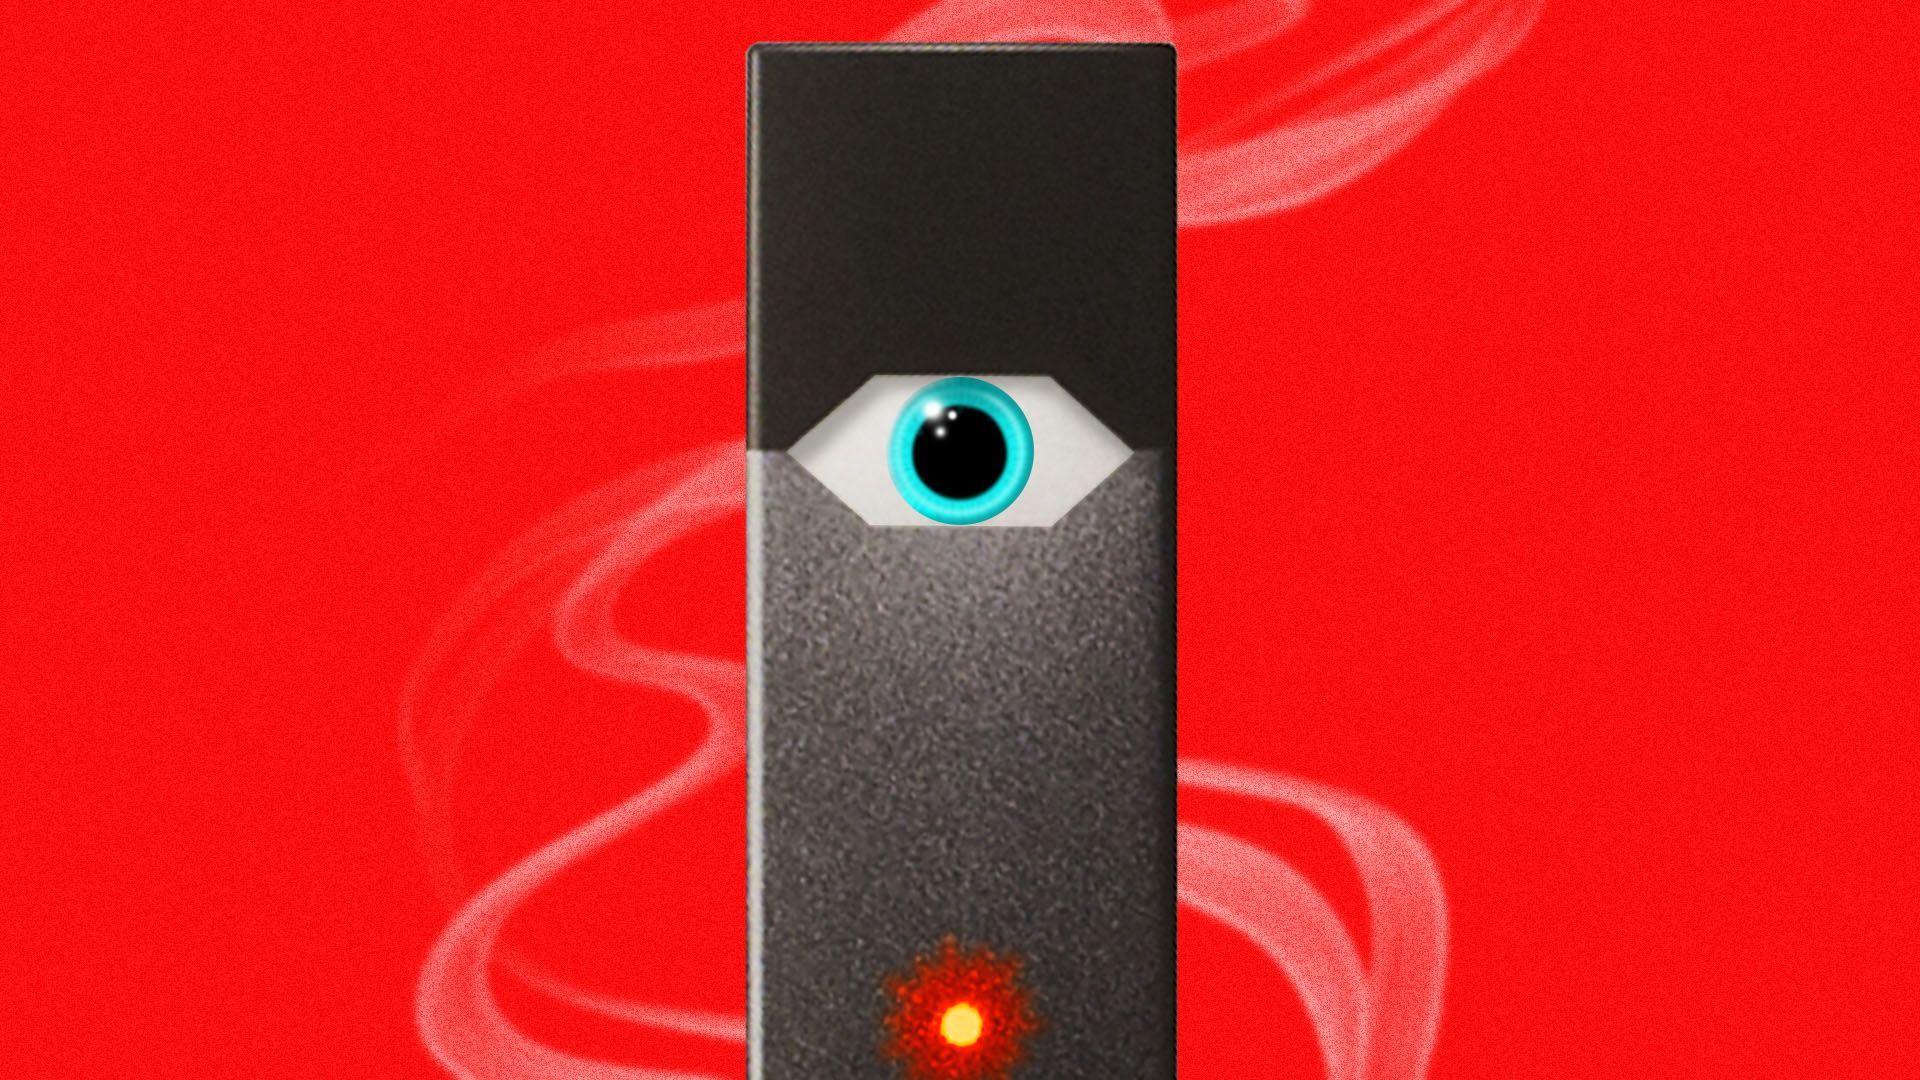 Illustration of a juul device with an eyeball